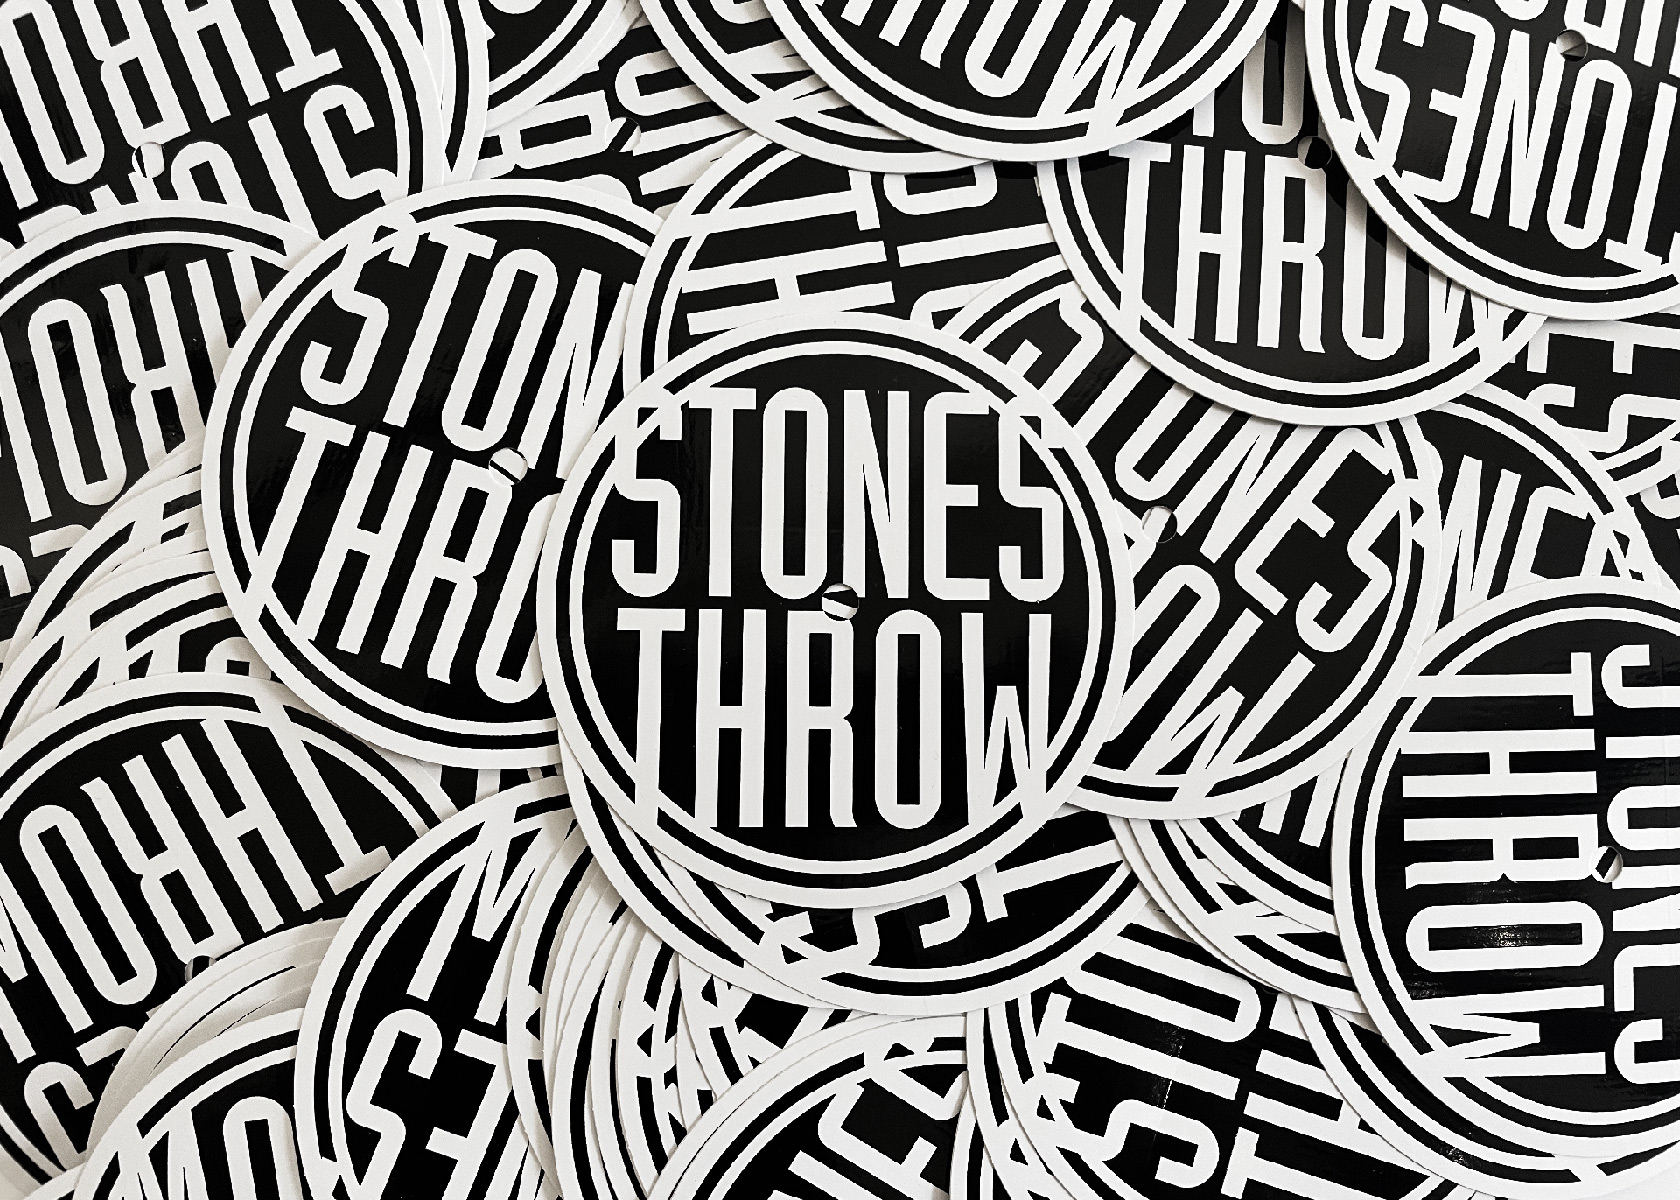 We Have Stickers. | Stones Throw Records